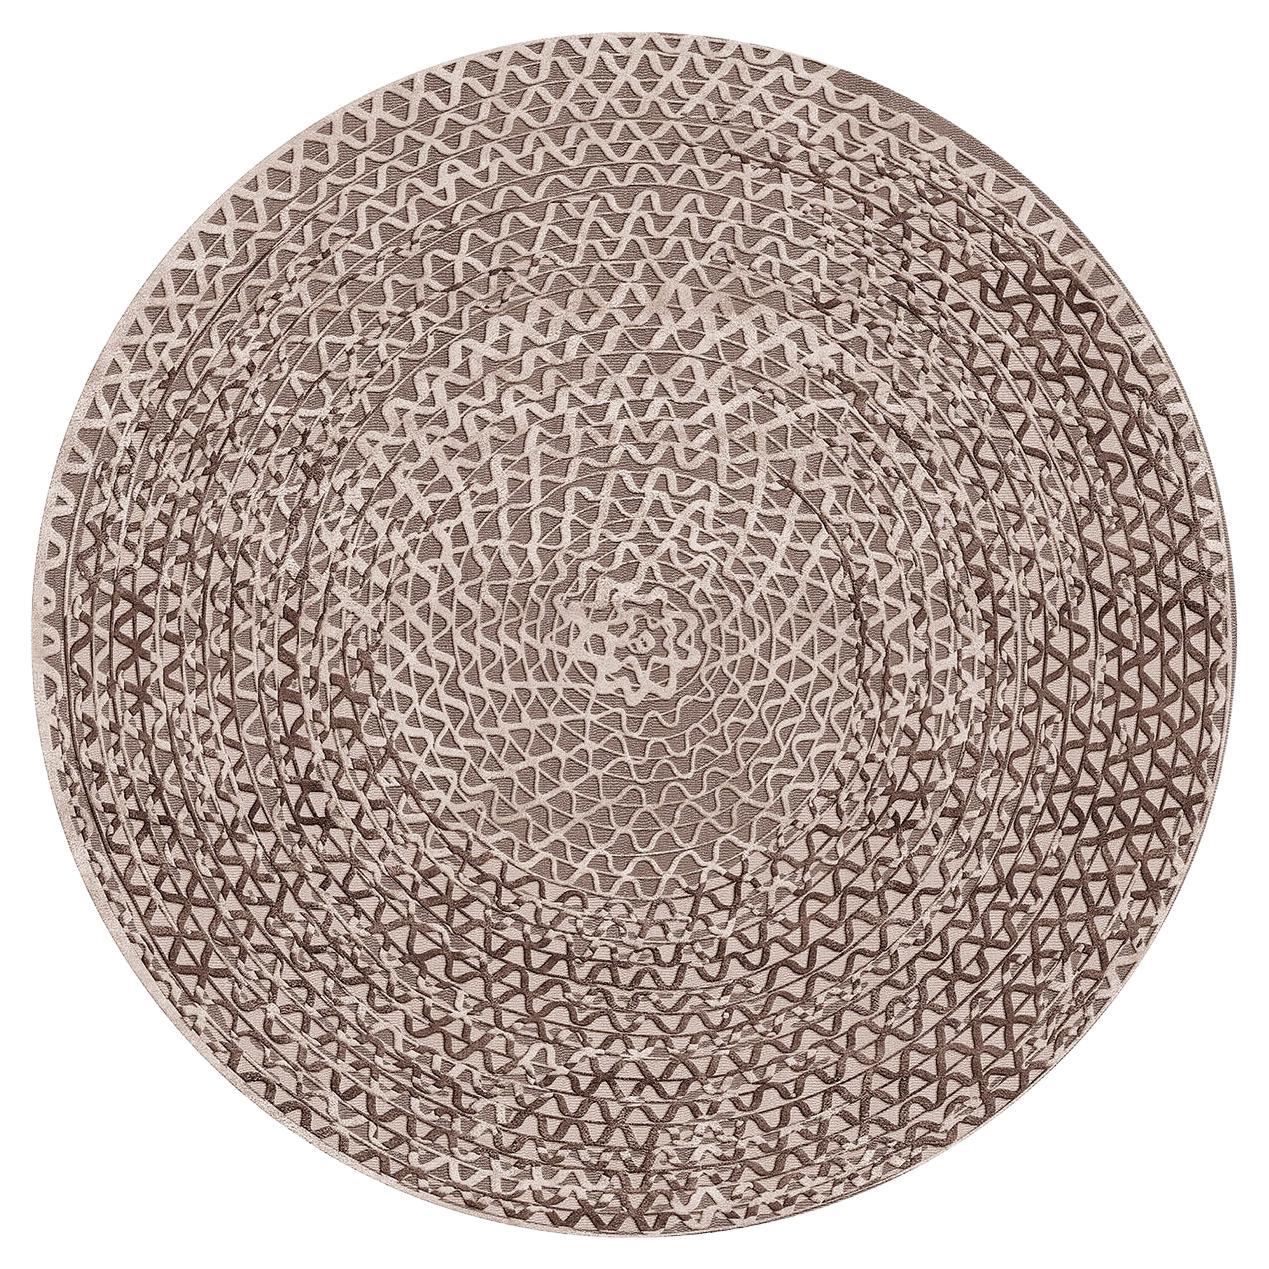 Triple Waves Round Beige Rug by Lorenza Bozzoli For Sale